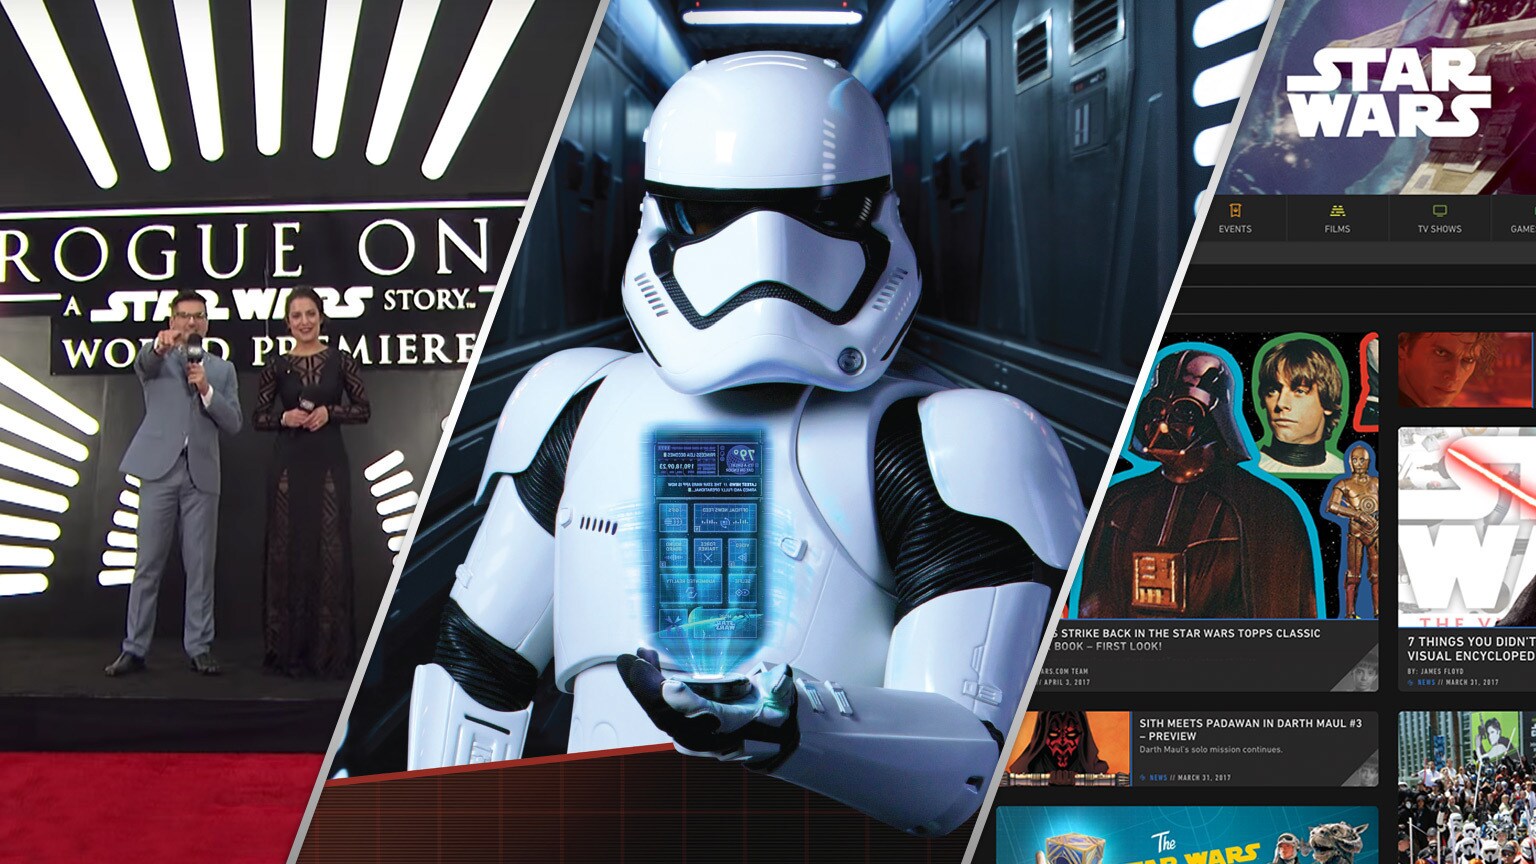 Vote for Star Wars in the Webby Awards!